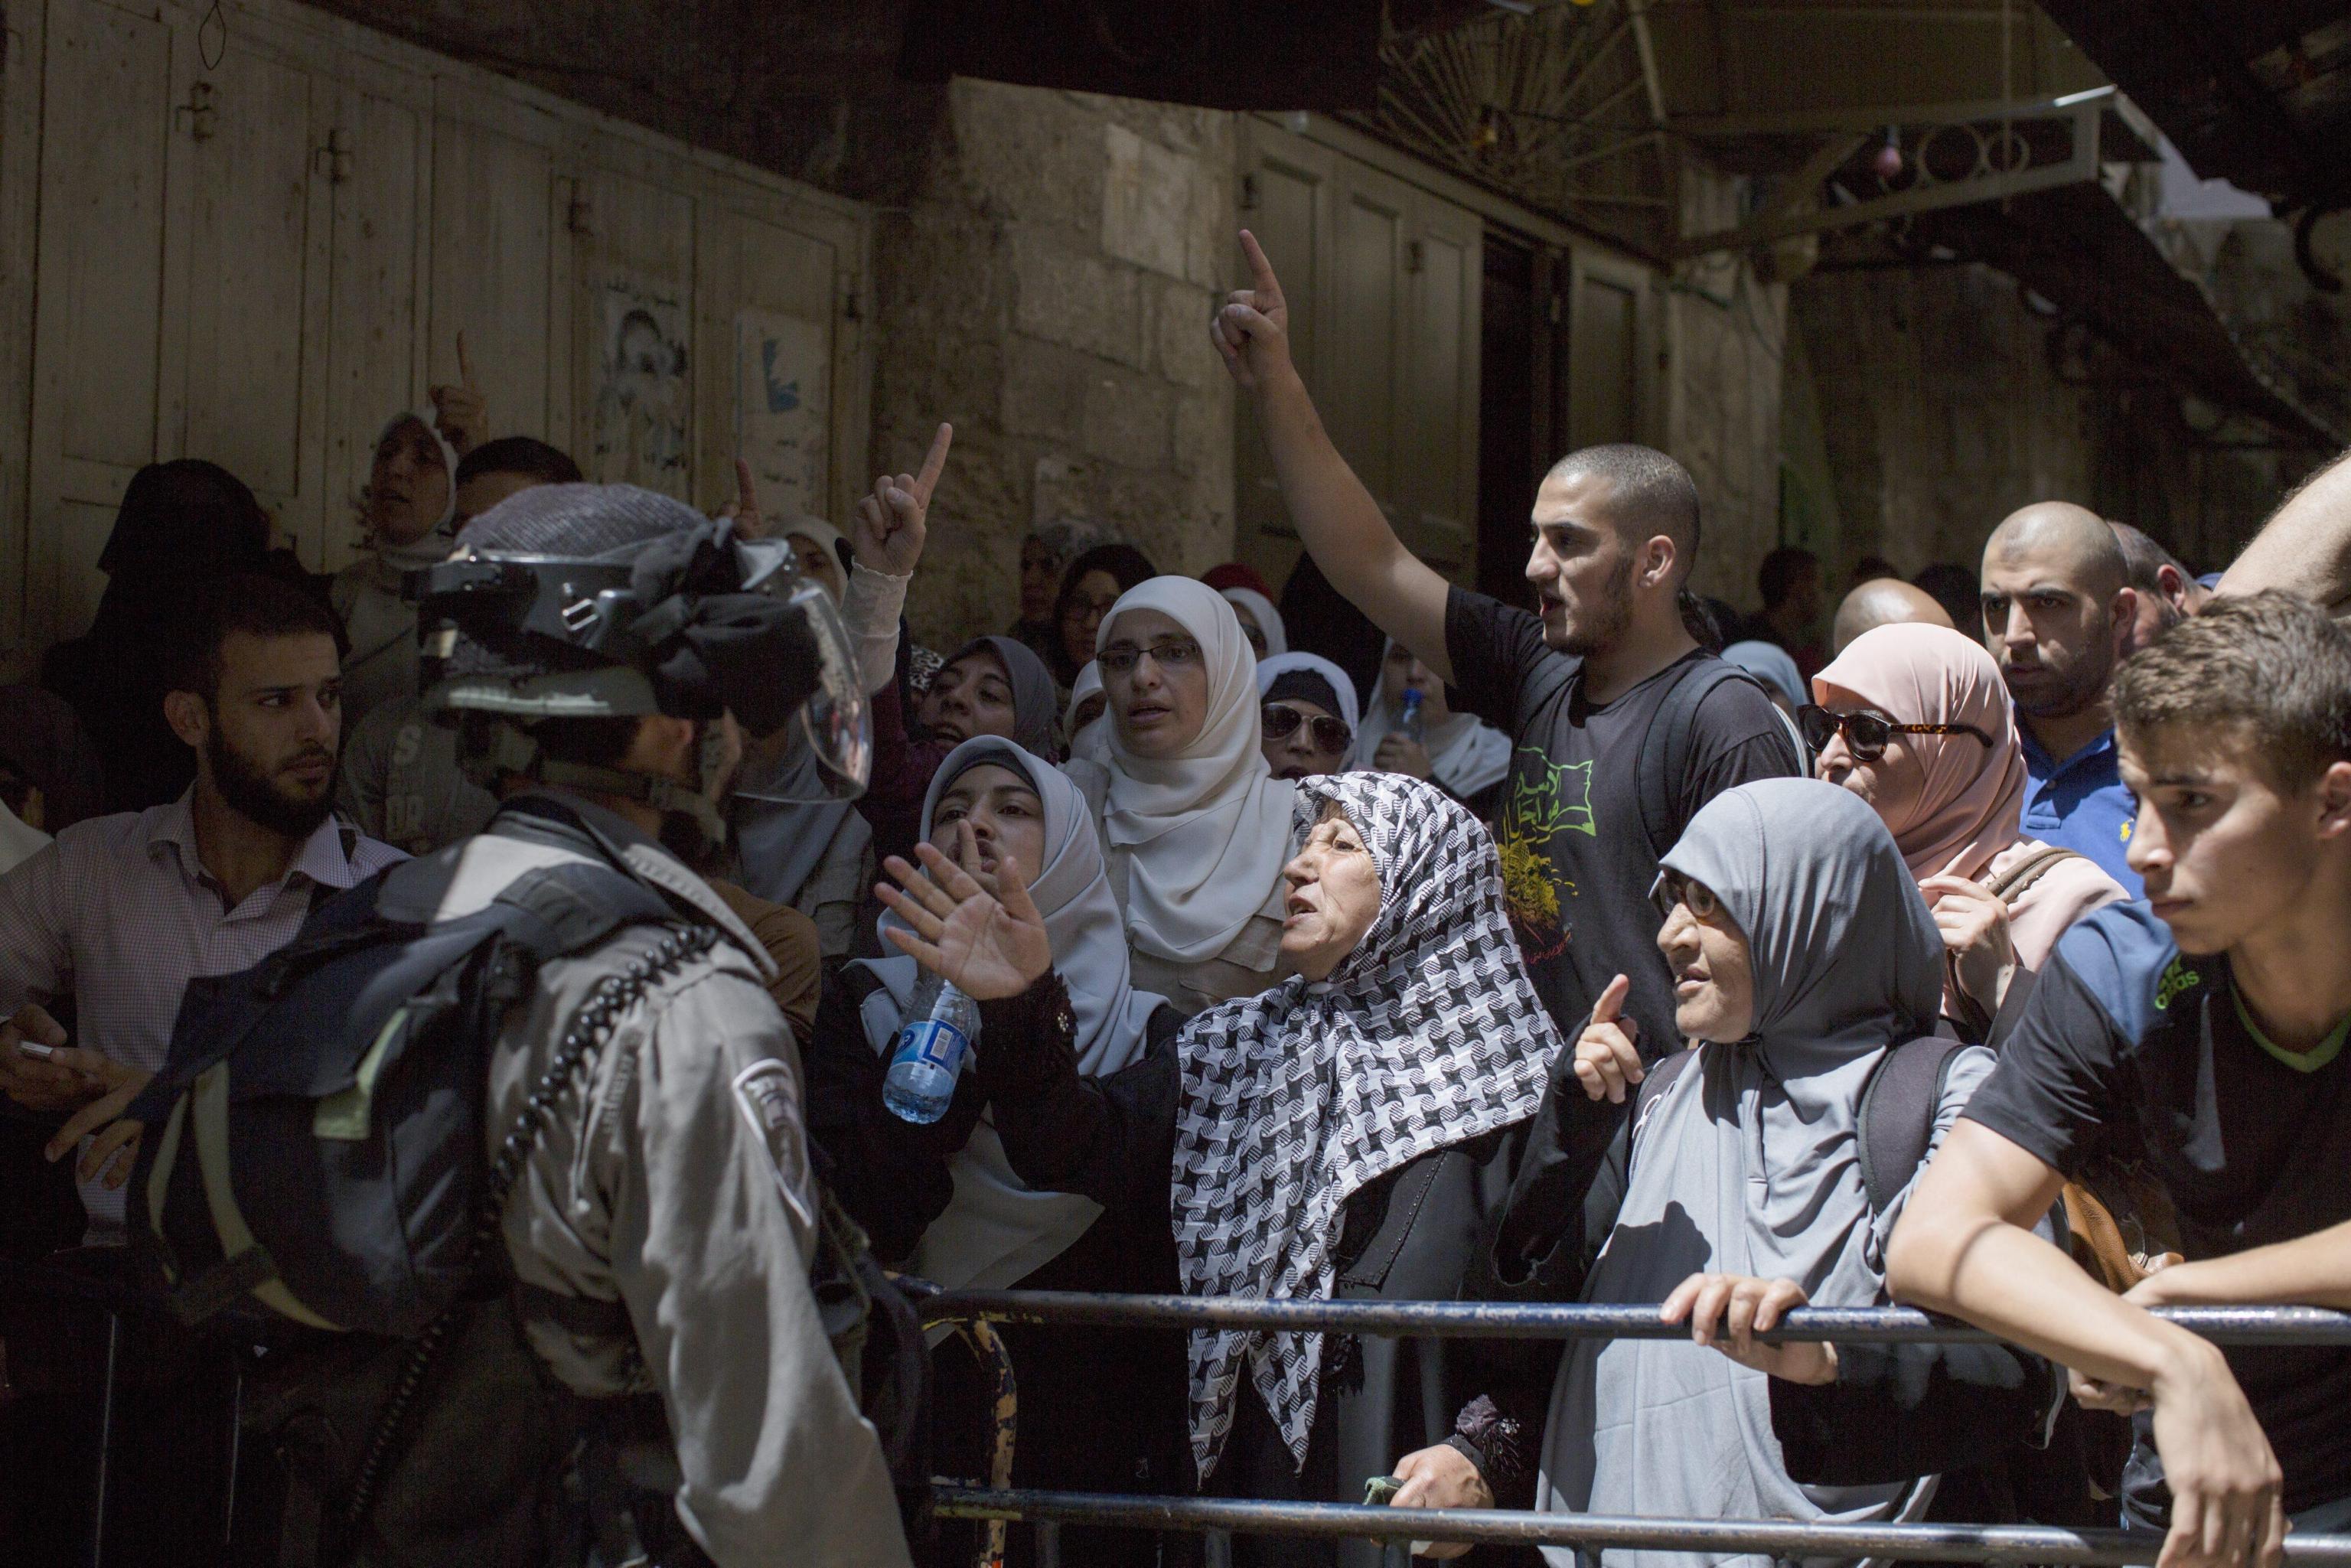 Israeli border police block Palestinians from entering into the Al-Aqsa mosque compound in the Old city of Jerusalem